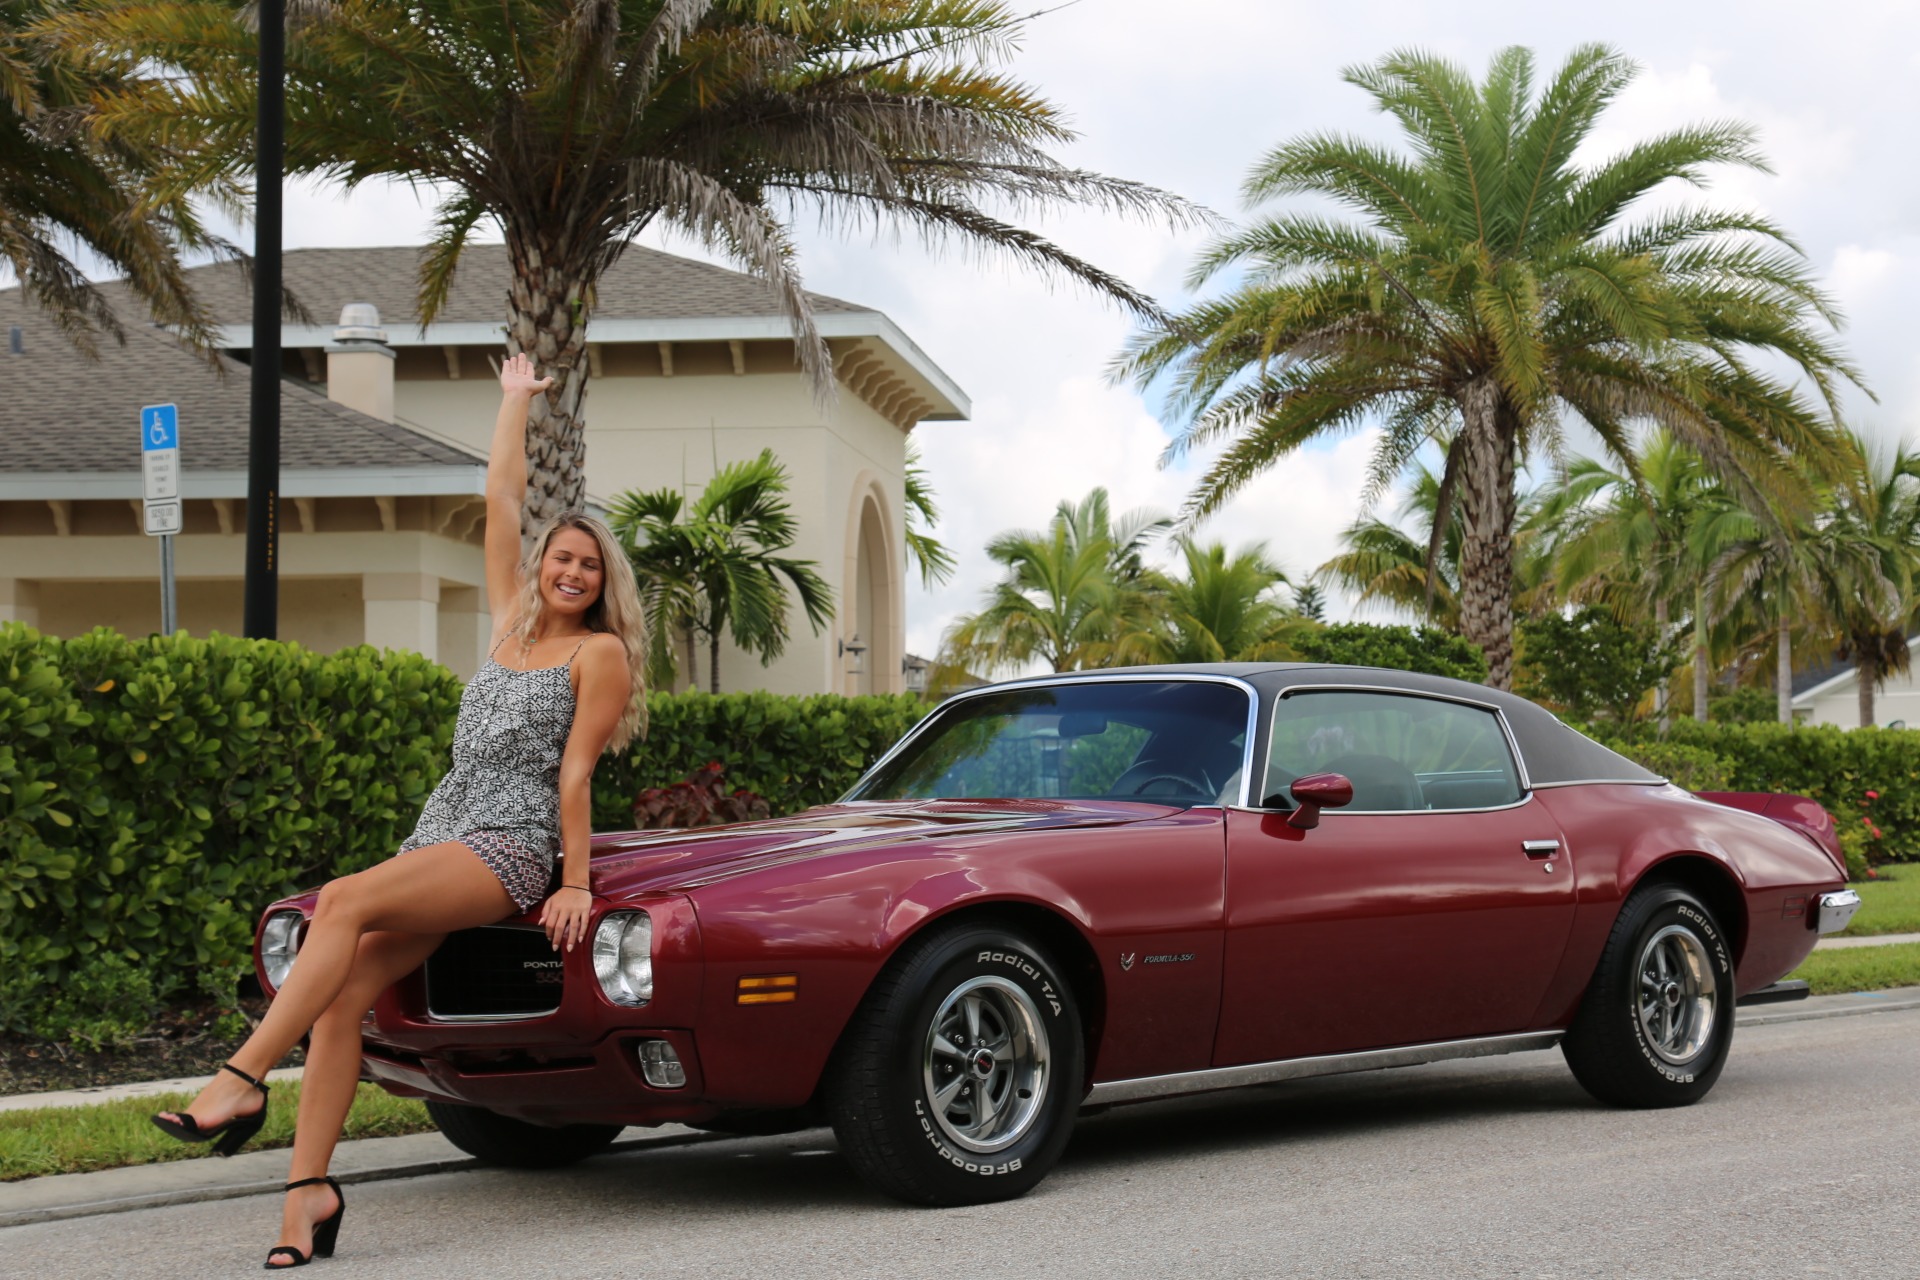 Used 1973 Pontiac Firebird Firebird for sale Sold at Muscle Cars for Sale Inc. in Fort Myers FL 33912 2